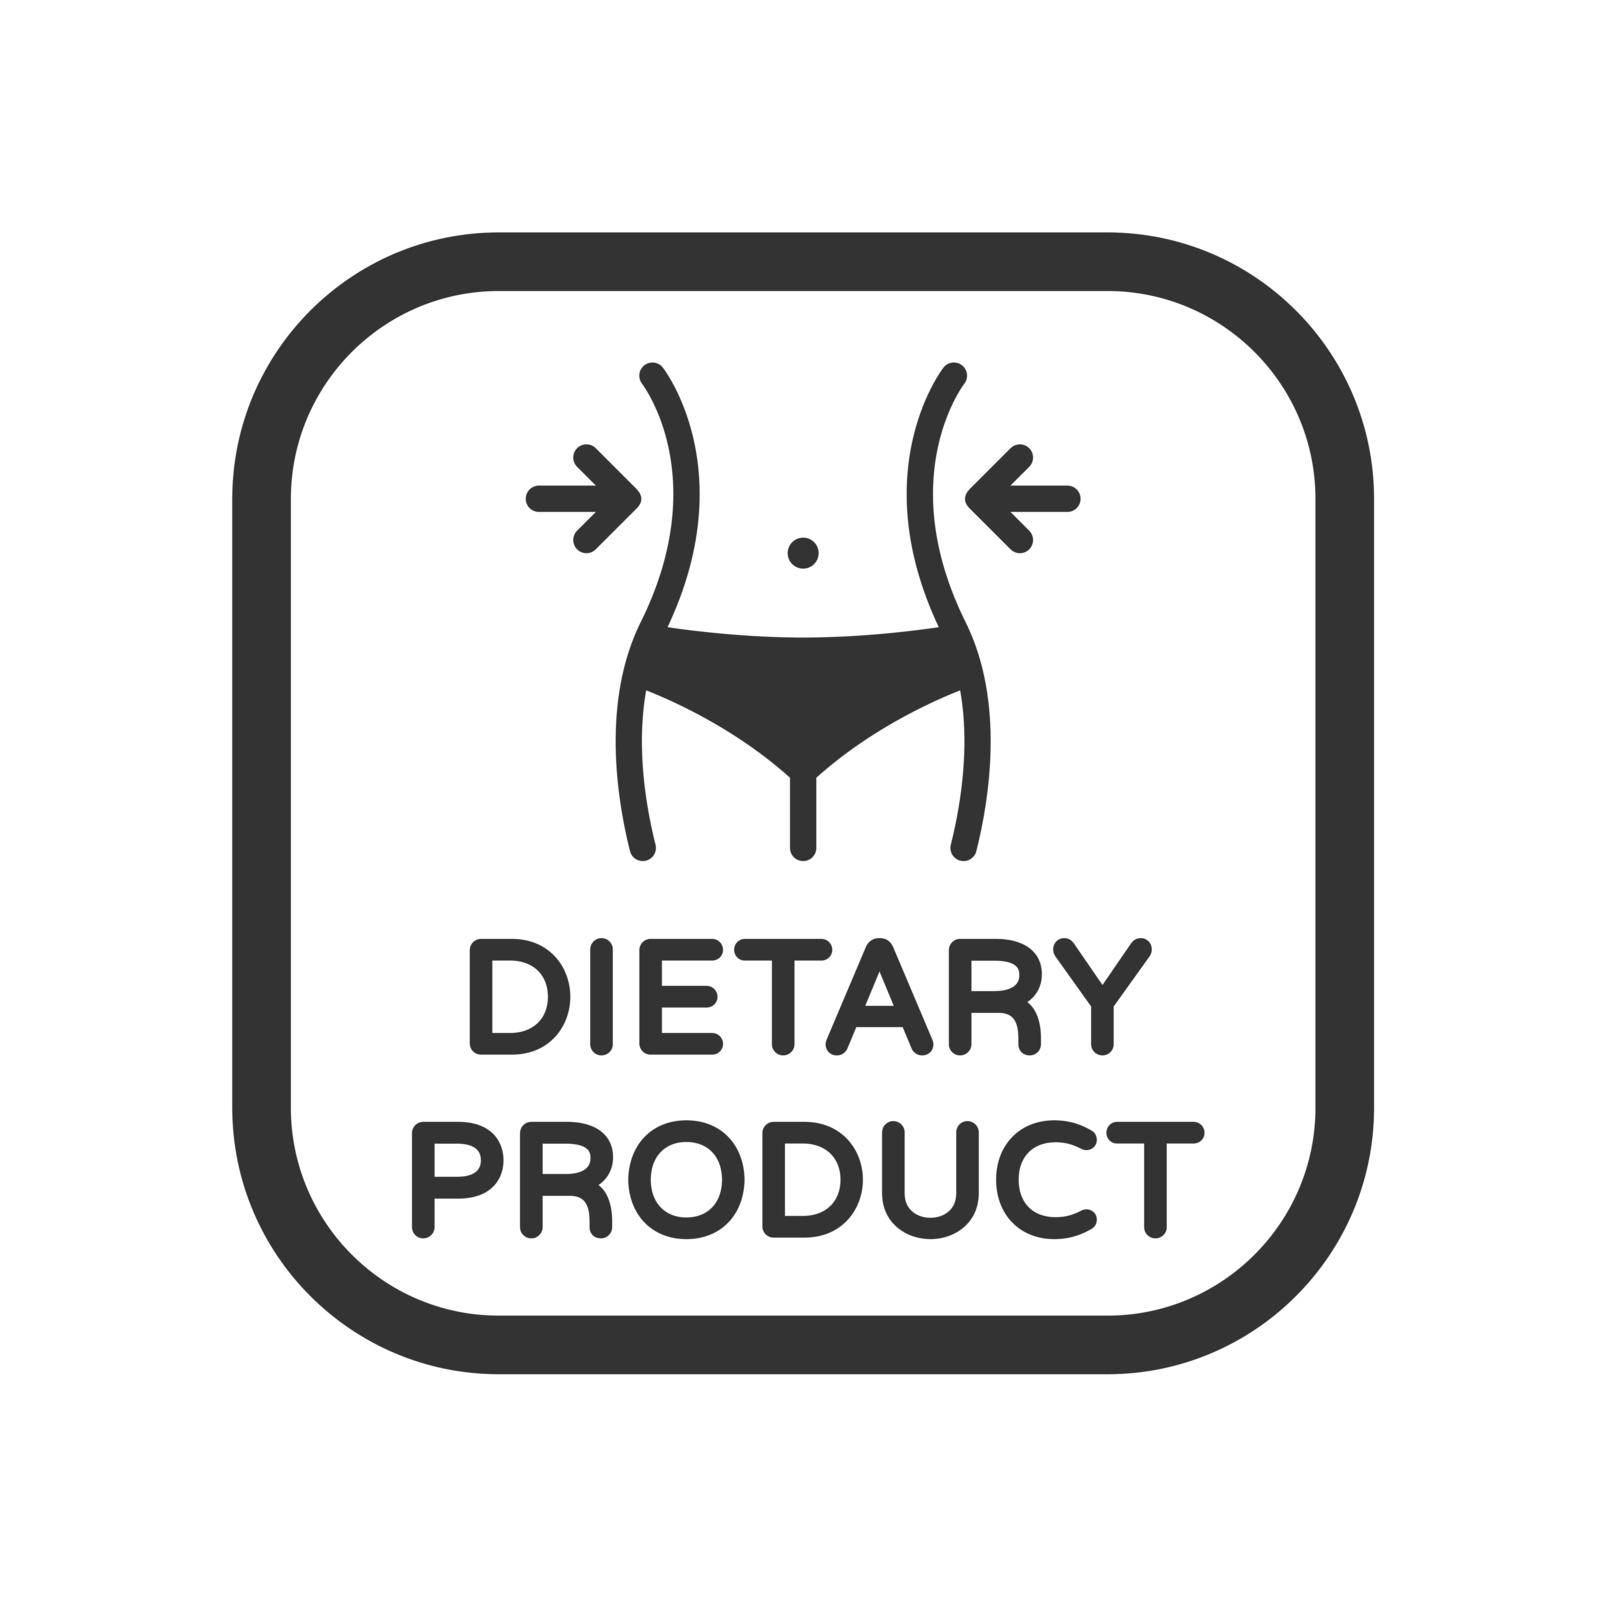 Dietary product vector icon.